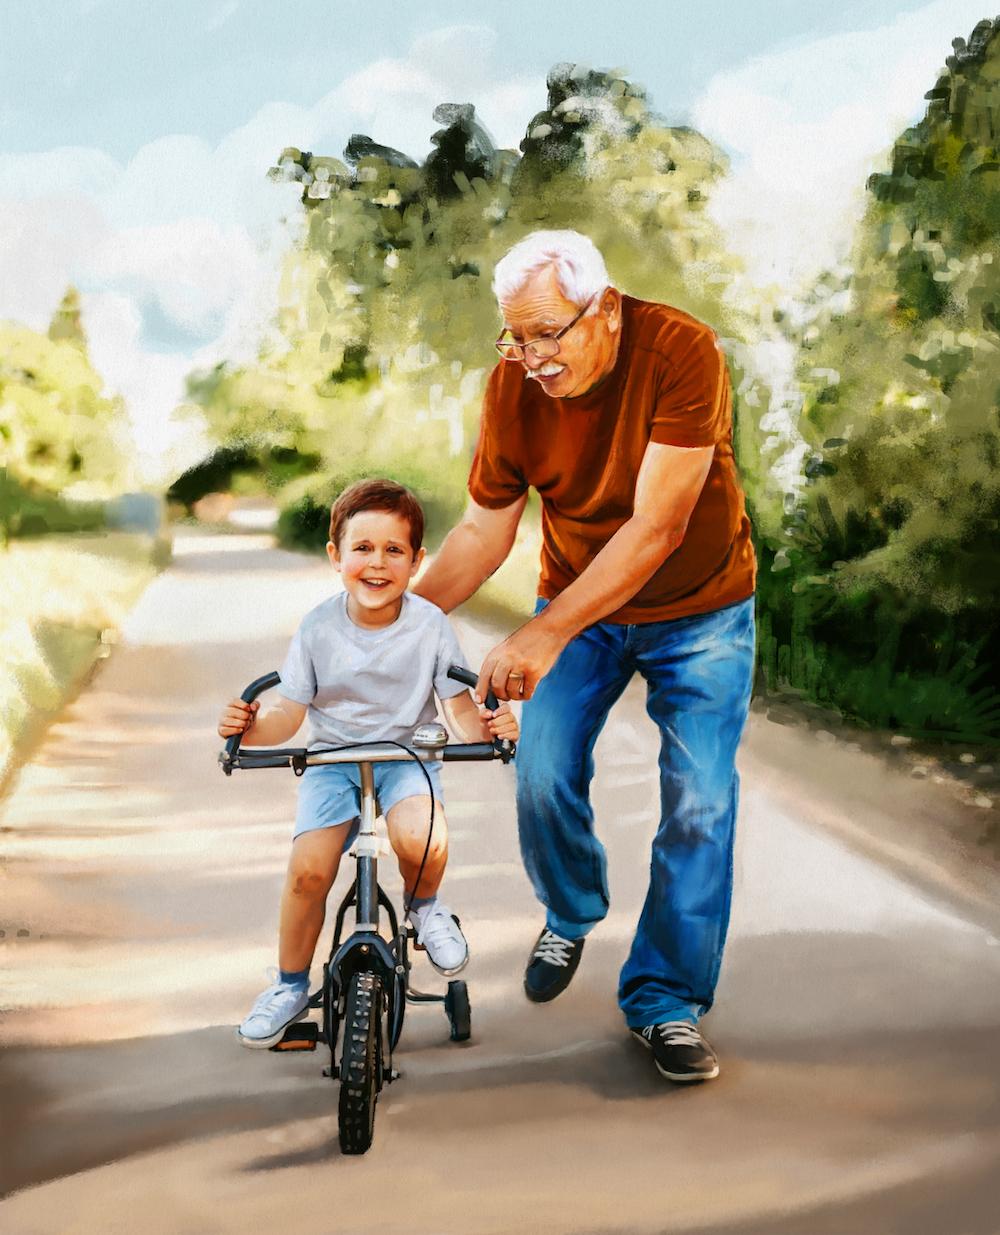 Interacting with a young grandchild, such as teaching them to ride a bike, is easy and enjoyable for both parties. To engage young adults, aim to engage them in activities and earn their trust. (Biba Kayewich)